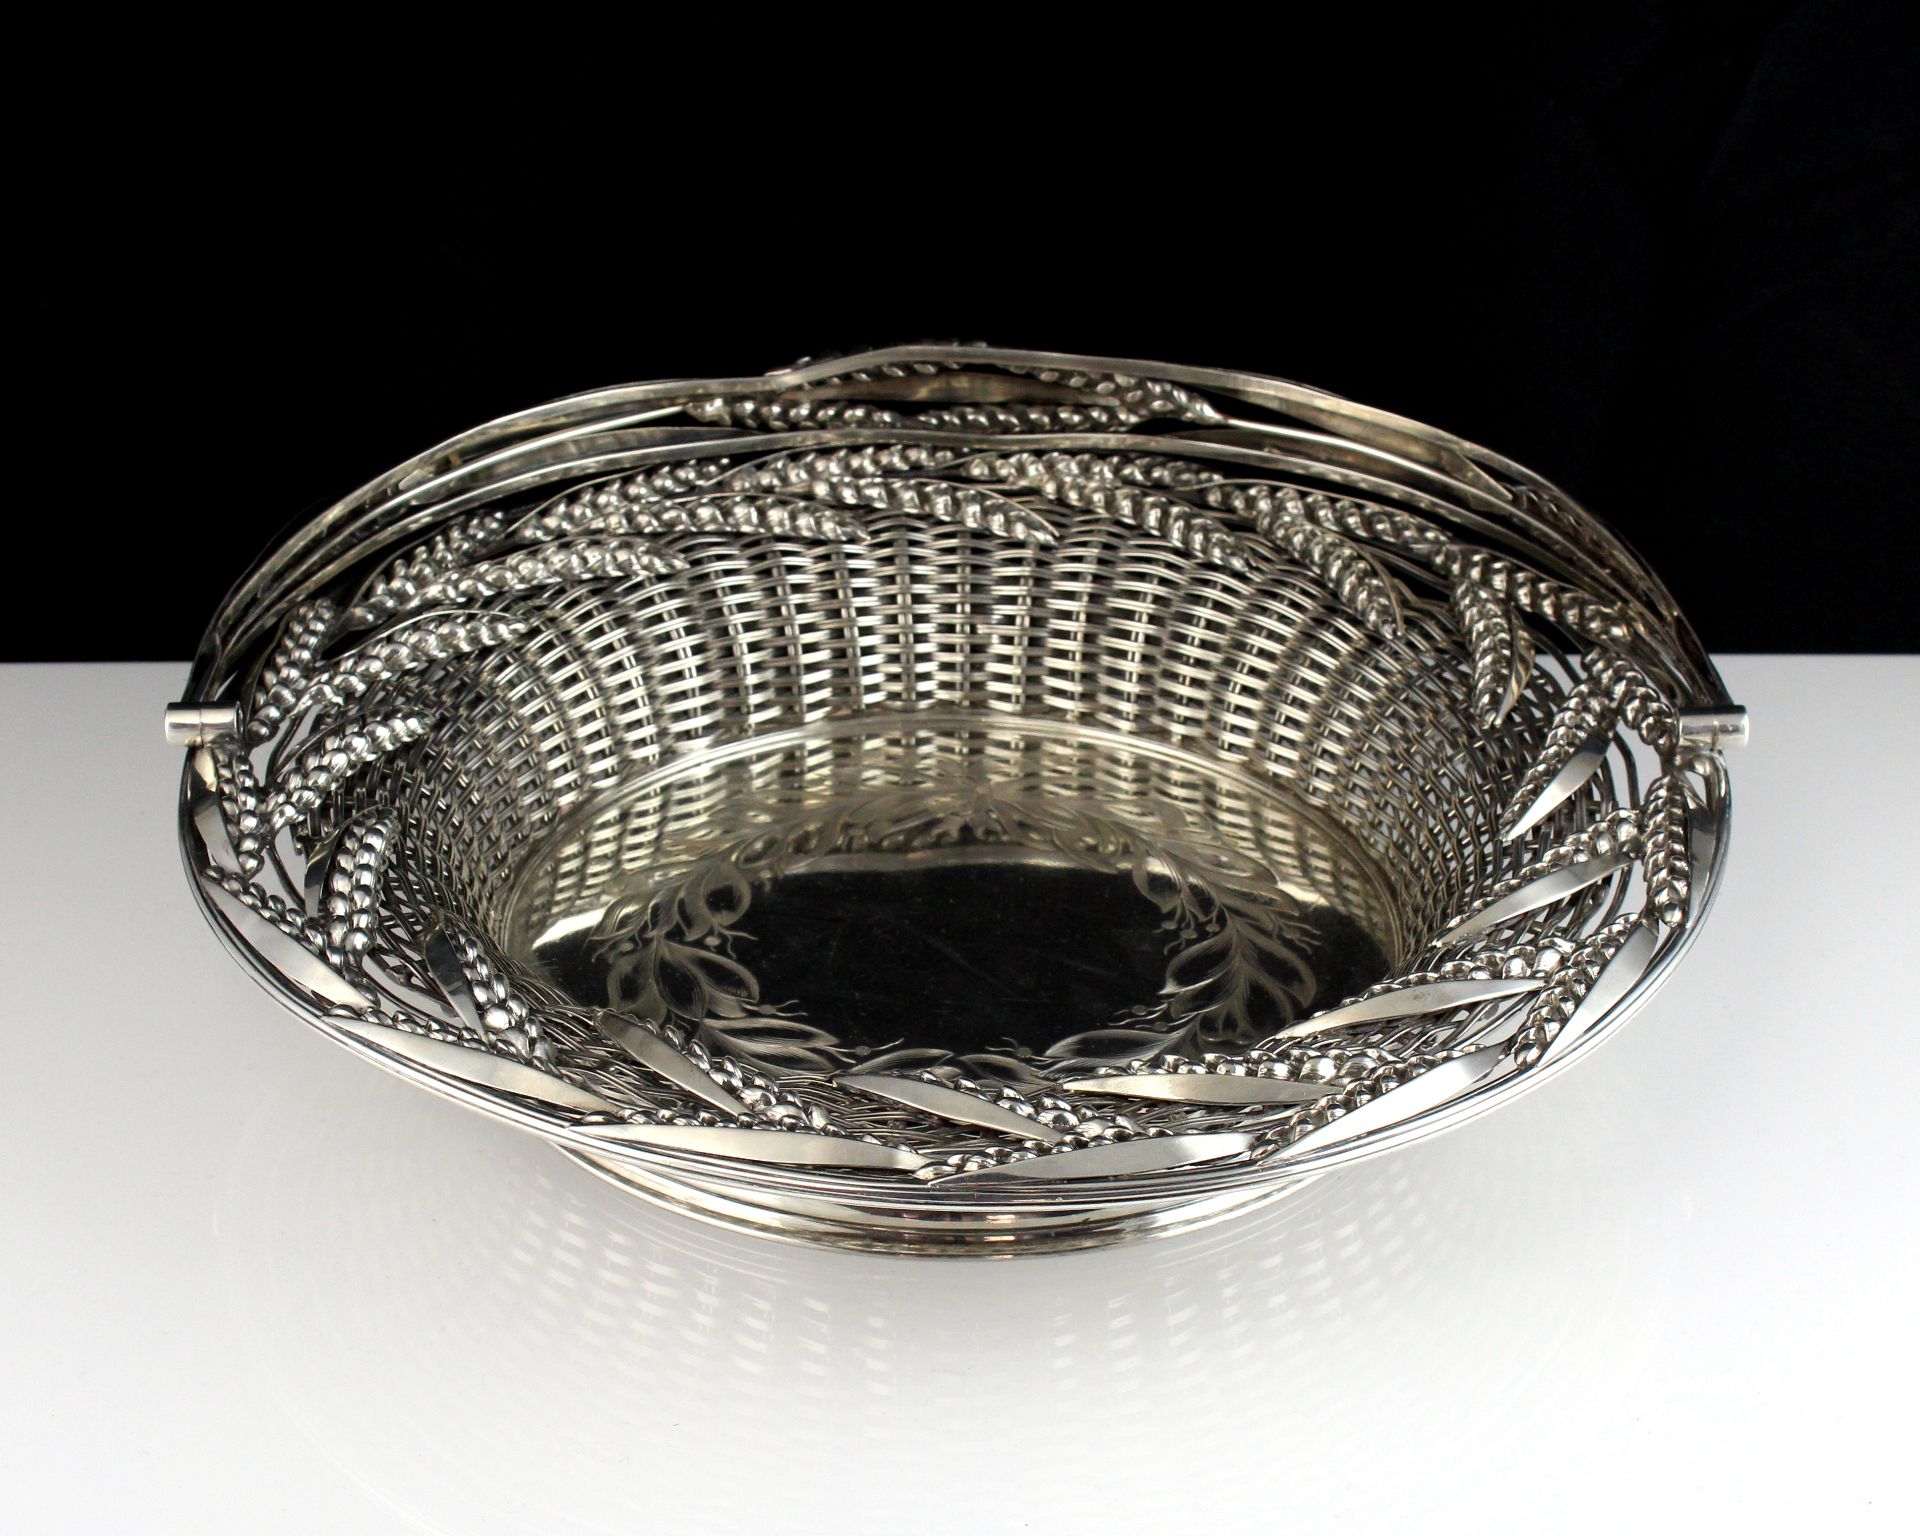 An antique Victorian Sterling Silver swing handled bread / cake basket by Thomas Bradbury & Son,